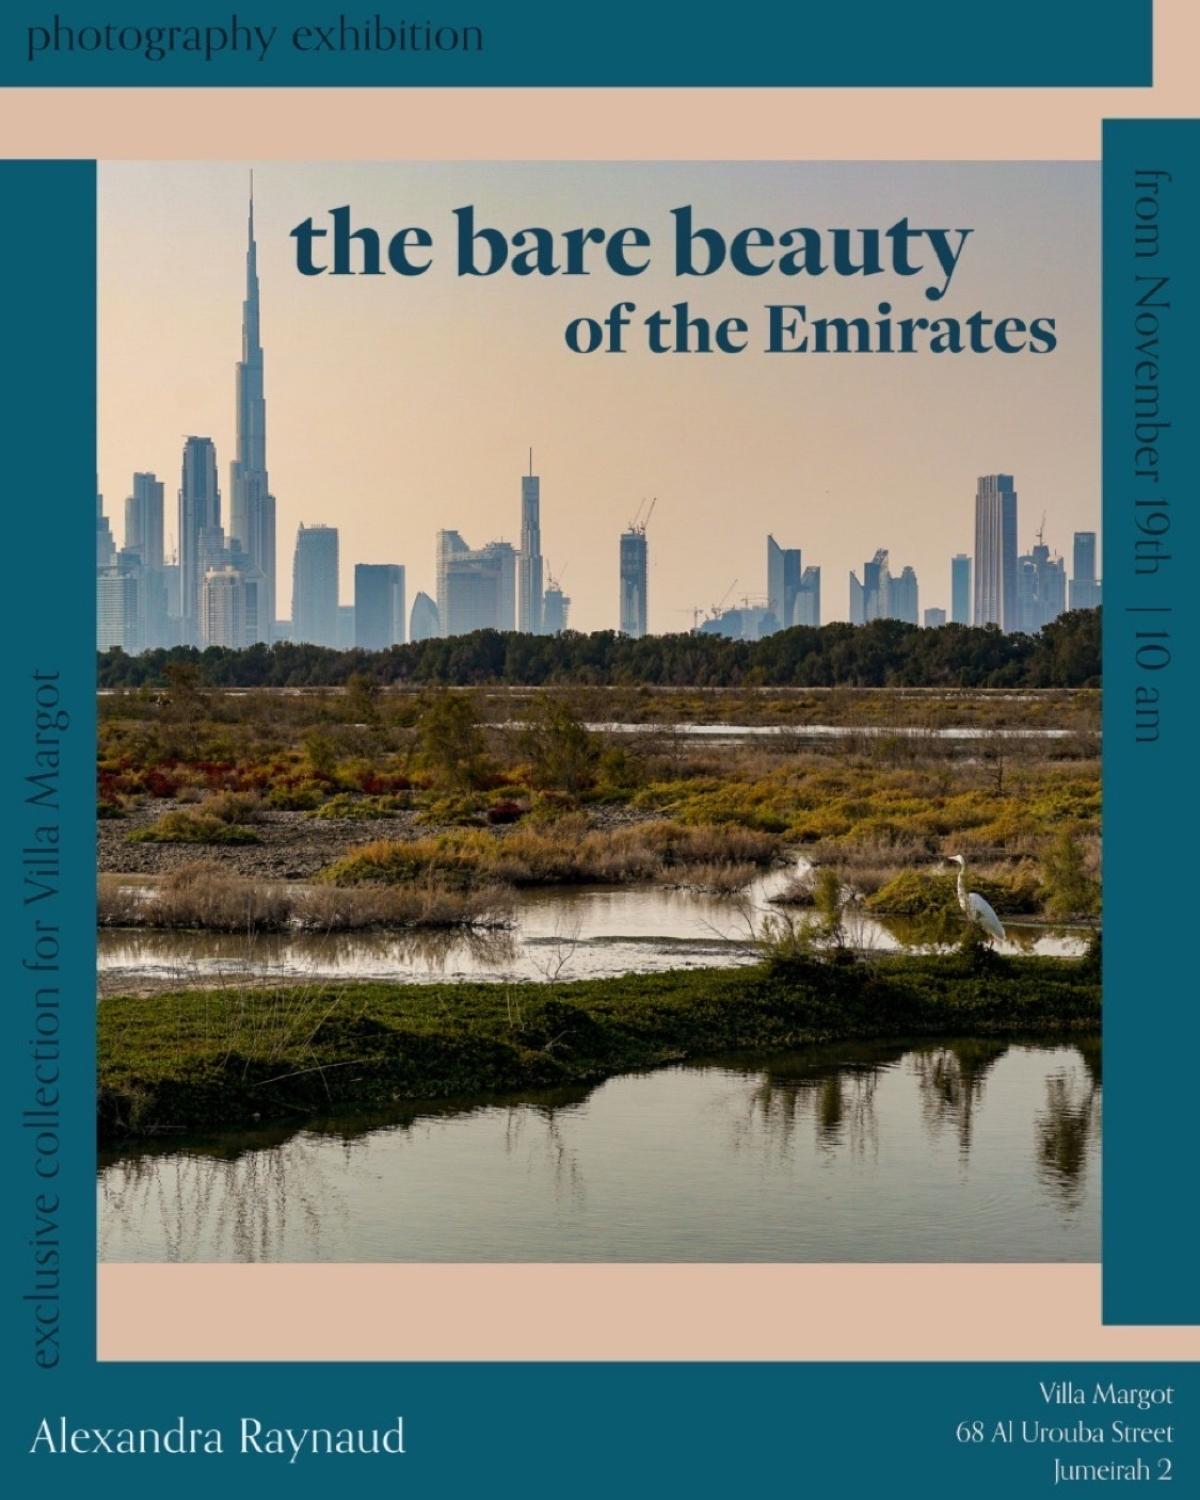 The Bare Beauty of the Emirates, Solo Exhibition, Nov 2020